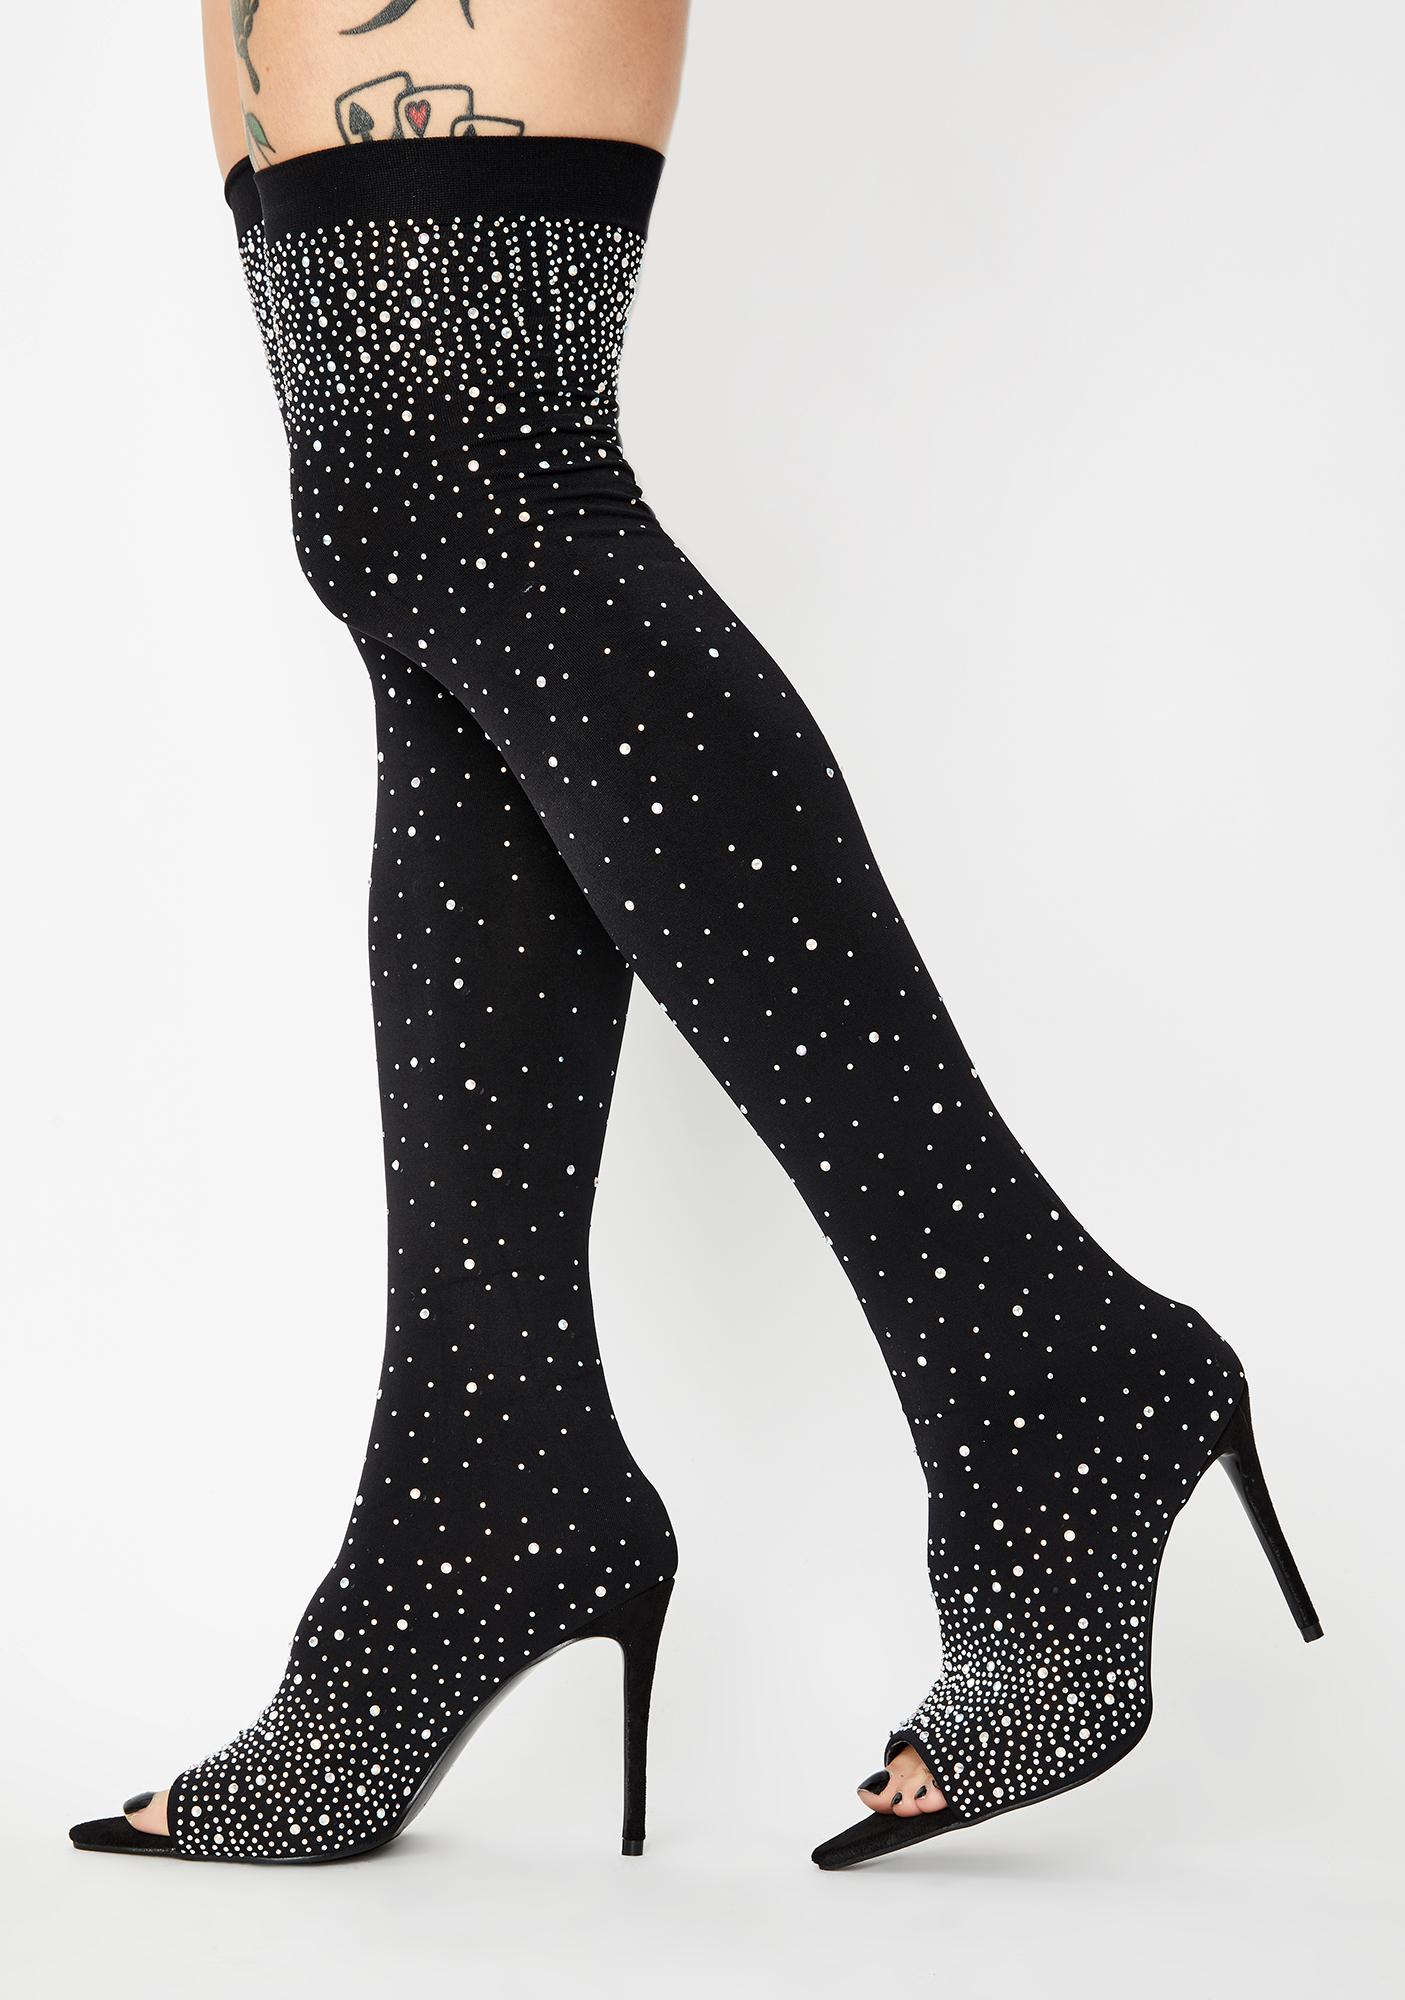 bedazzled thigh high boots